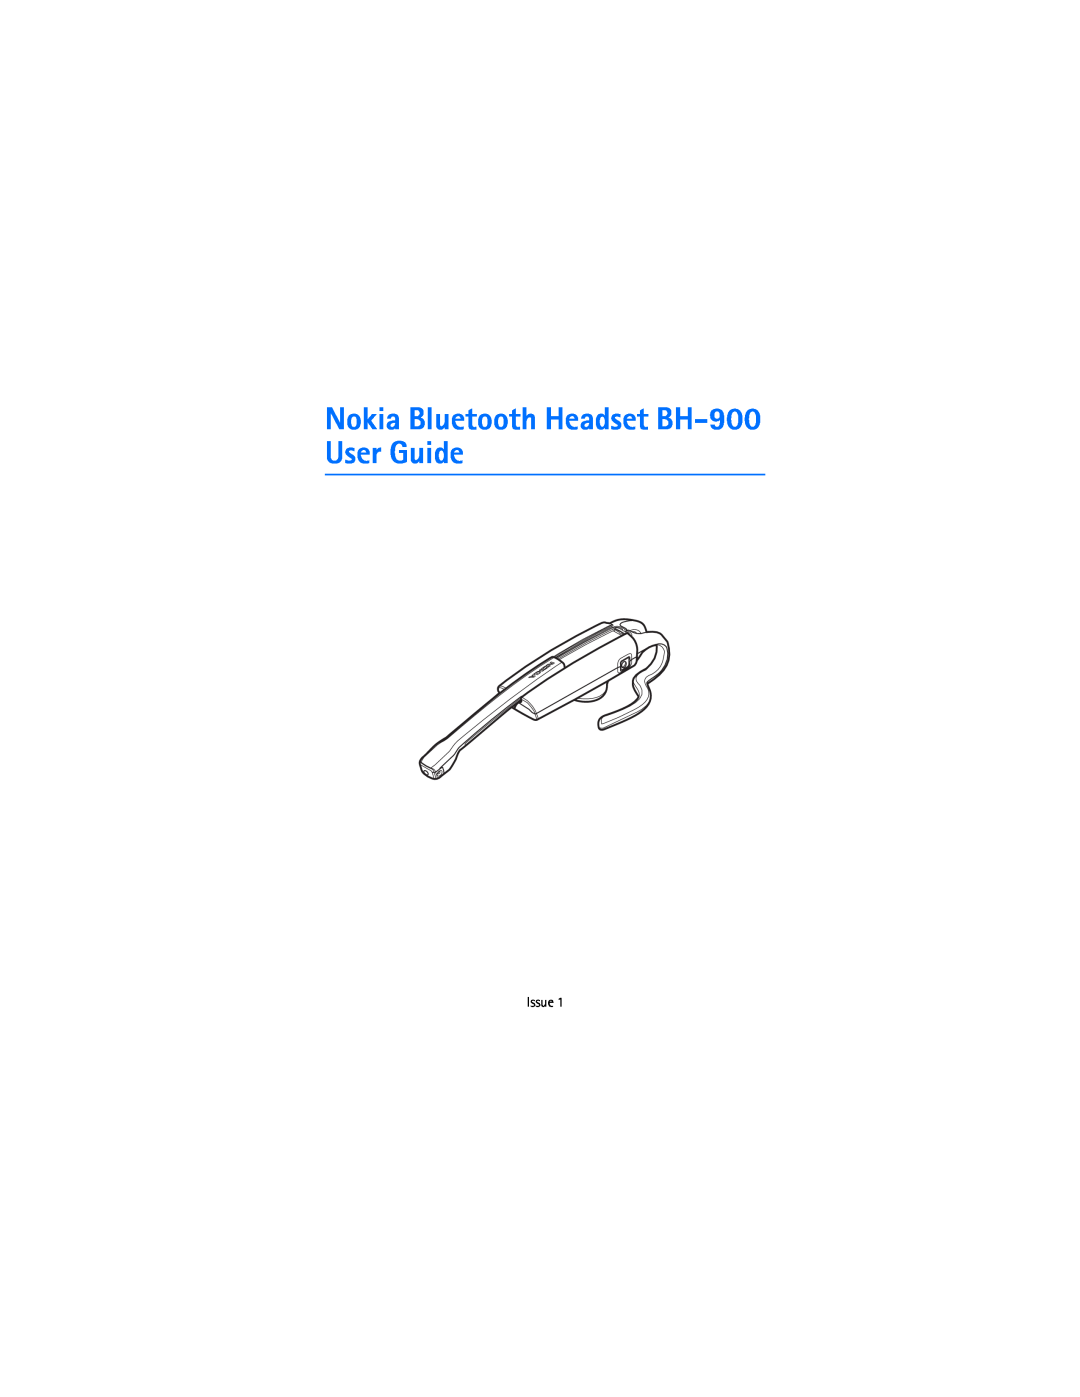 Nokia manual Nokia Bluetooth Headset BH-900User Guide, Issue 